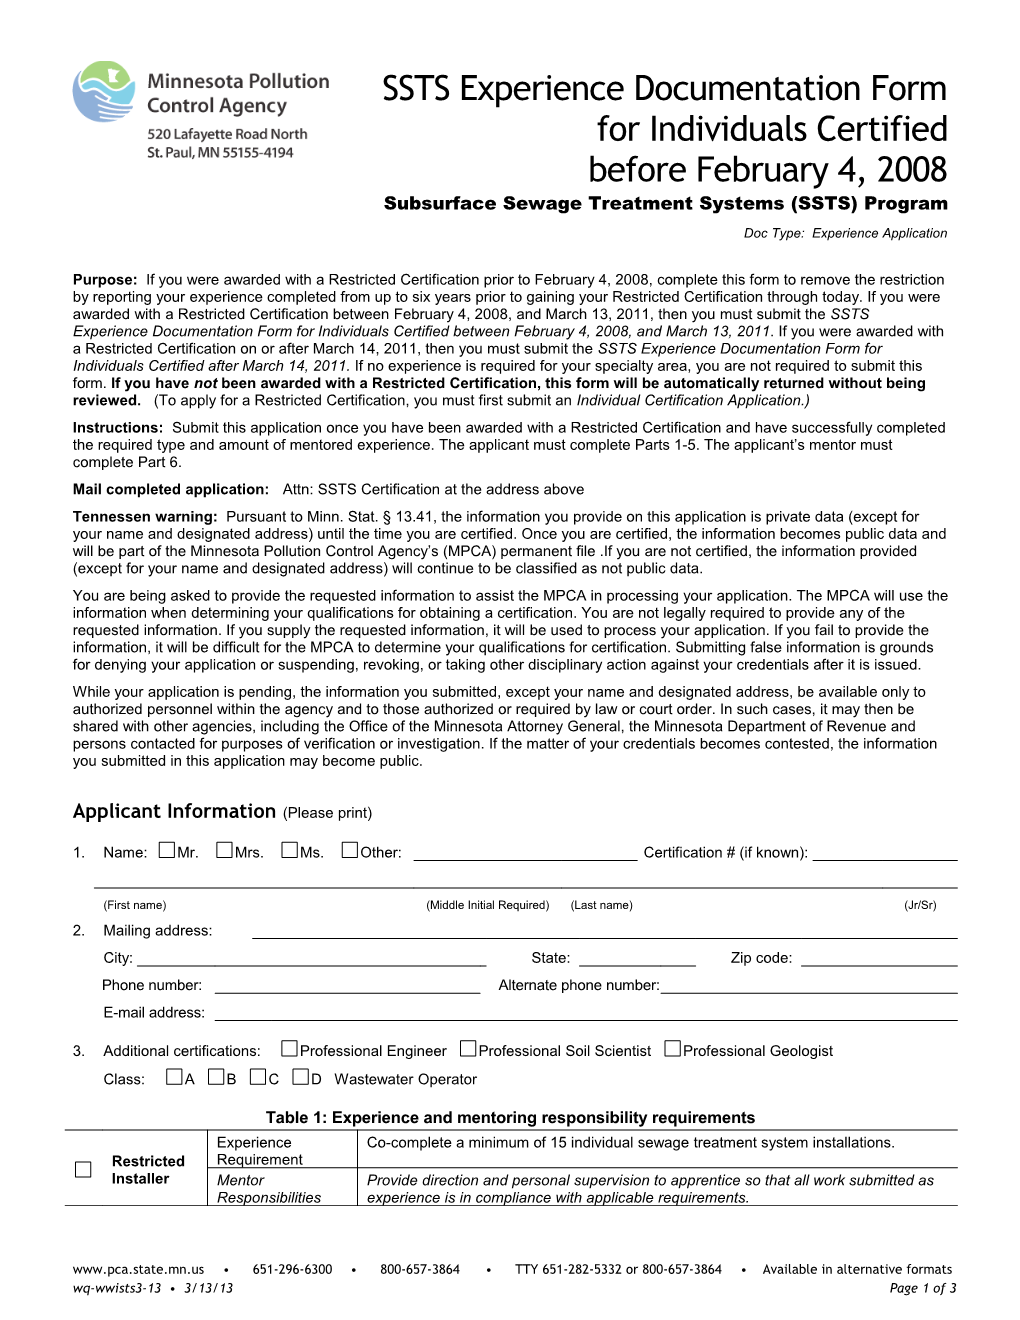 Experience Documentation Form - Subsurface Sewage Treatment Systems (SSTS) Program For